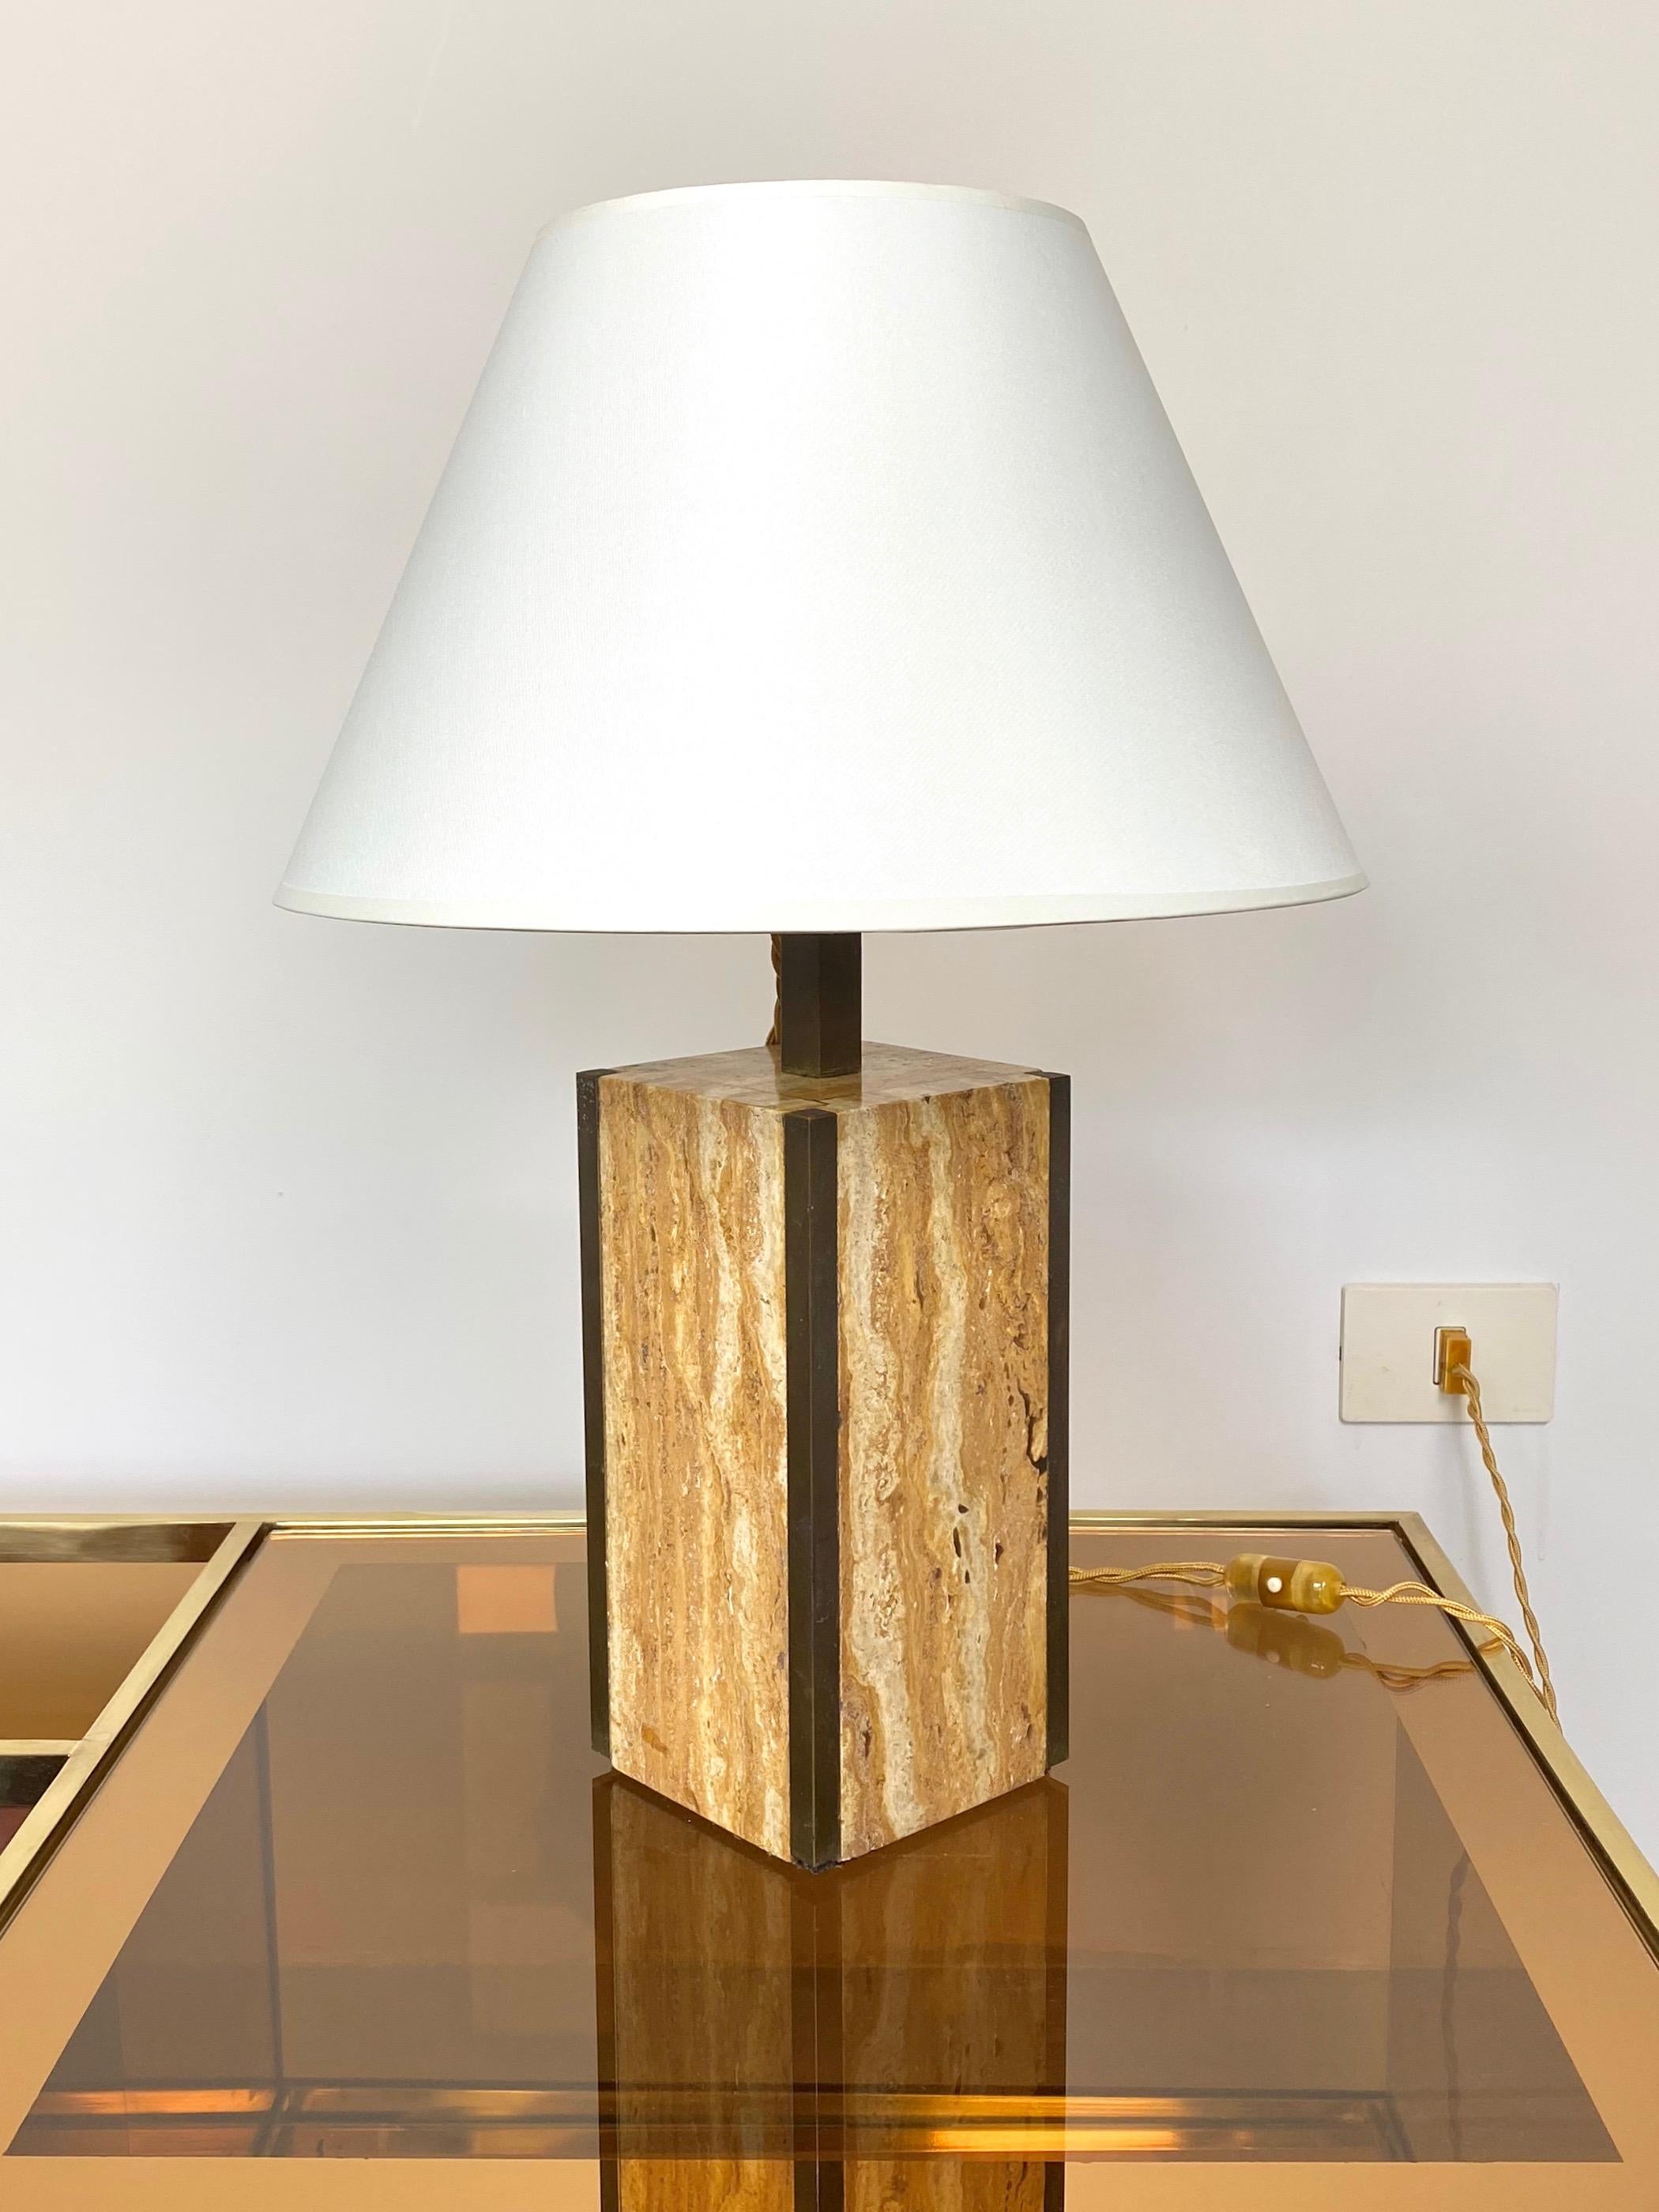 Table lamp in a travertine walnut base with brass details. Made in Italy in the 1970s.

Measures: Height without lampshade 52 cm, without 38 cm, base 12 x 12cm.